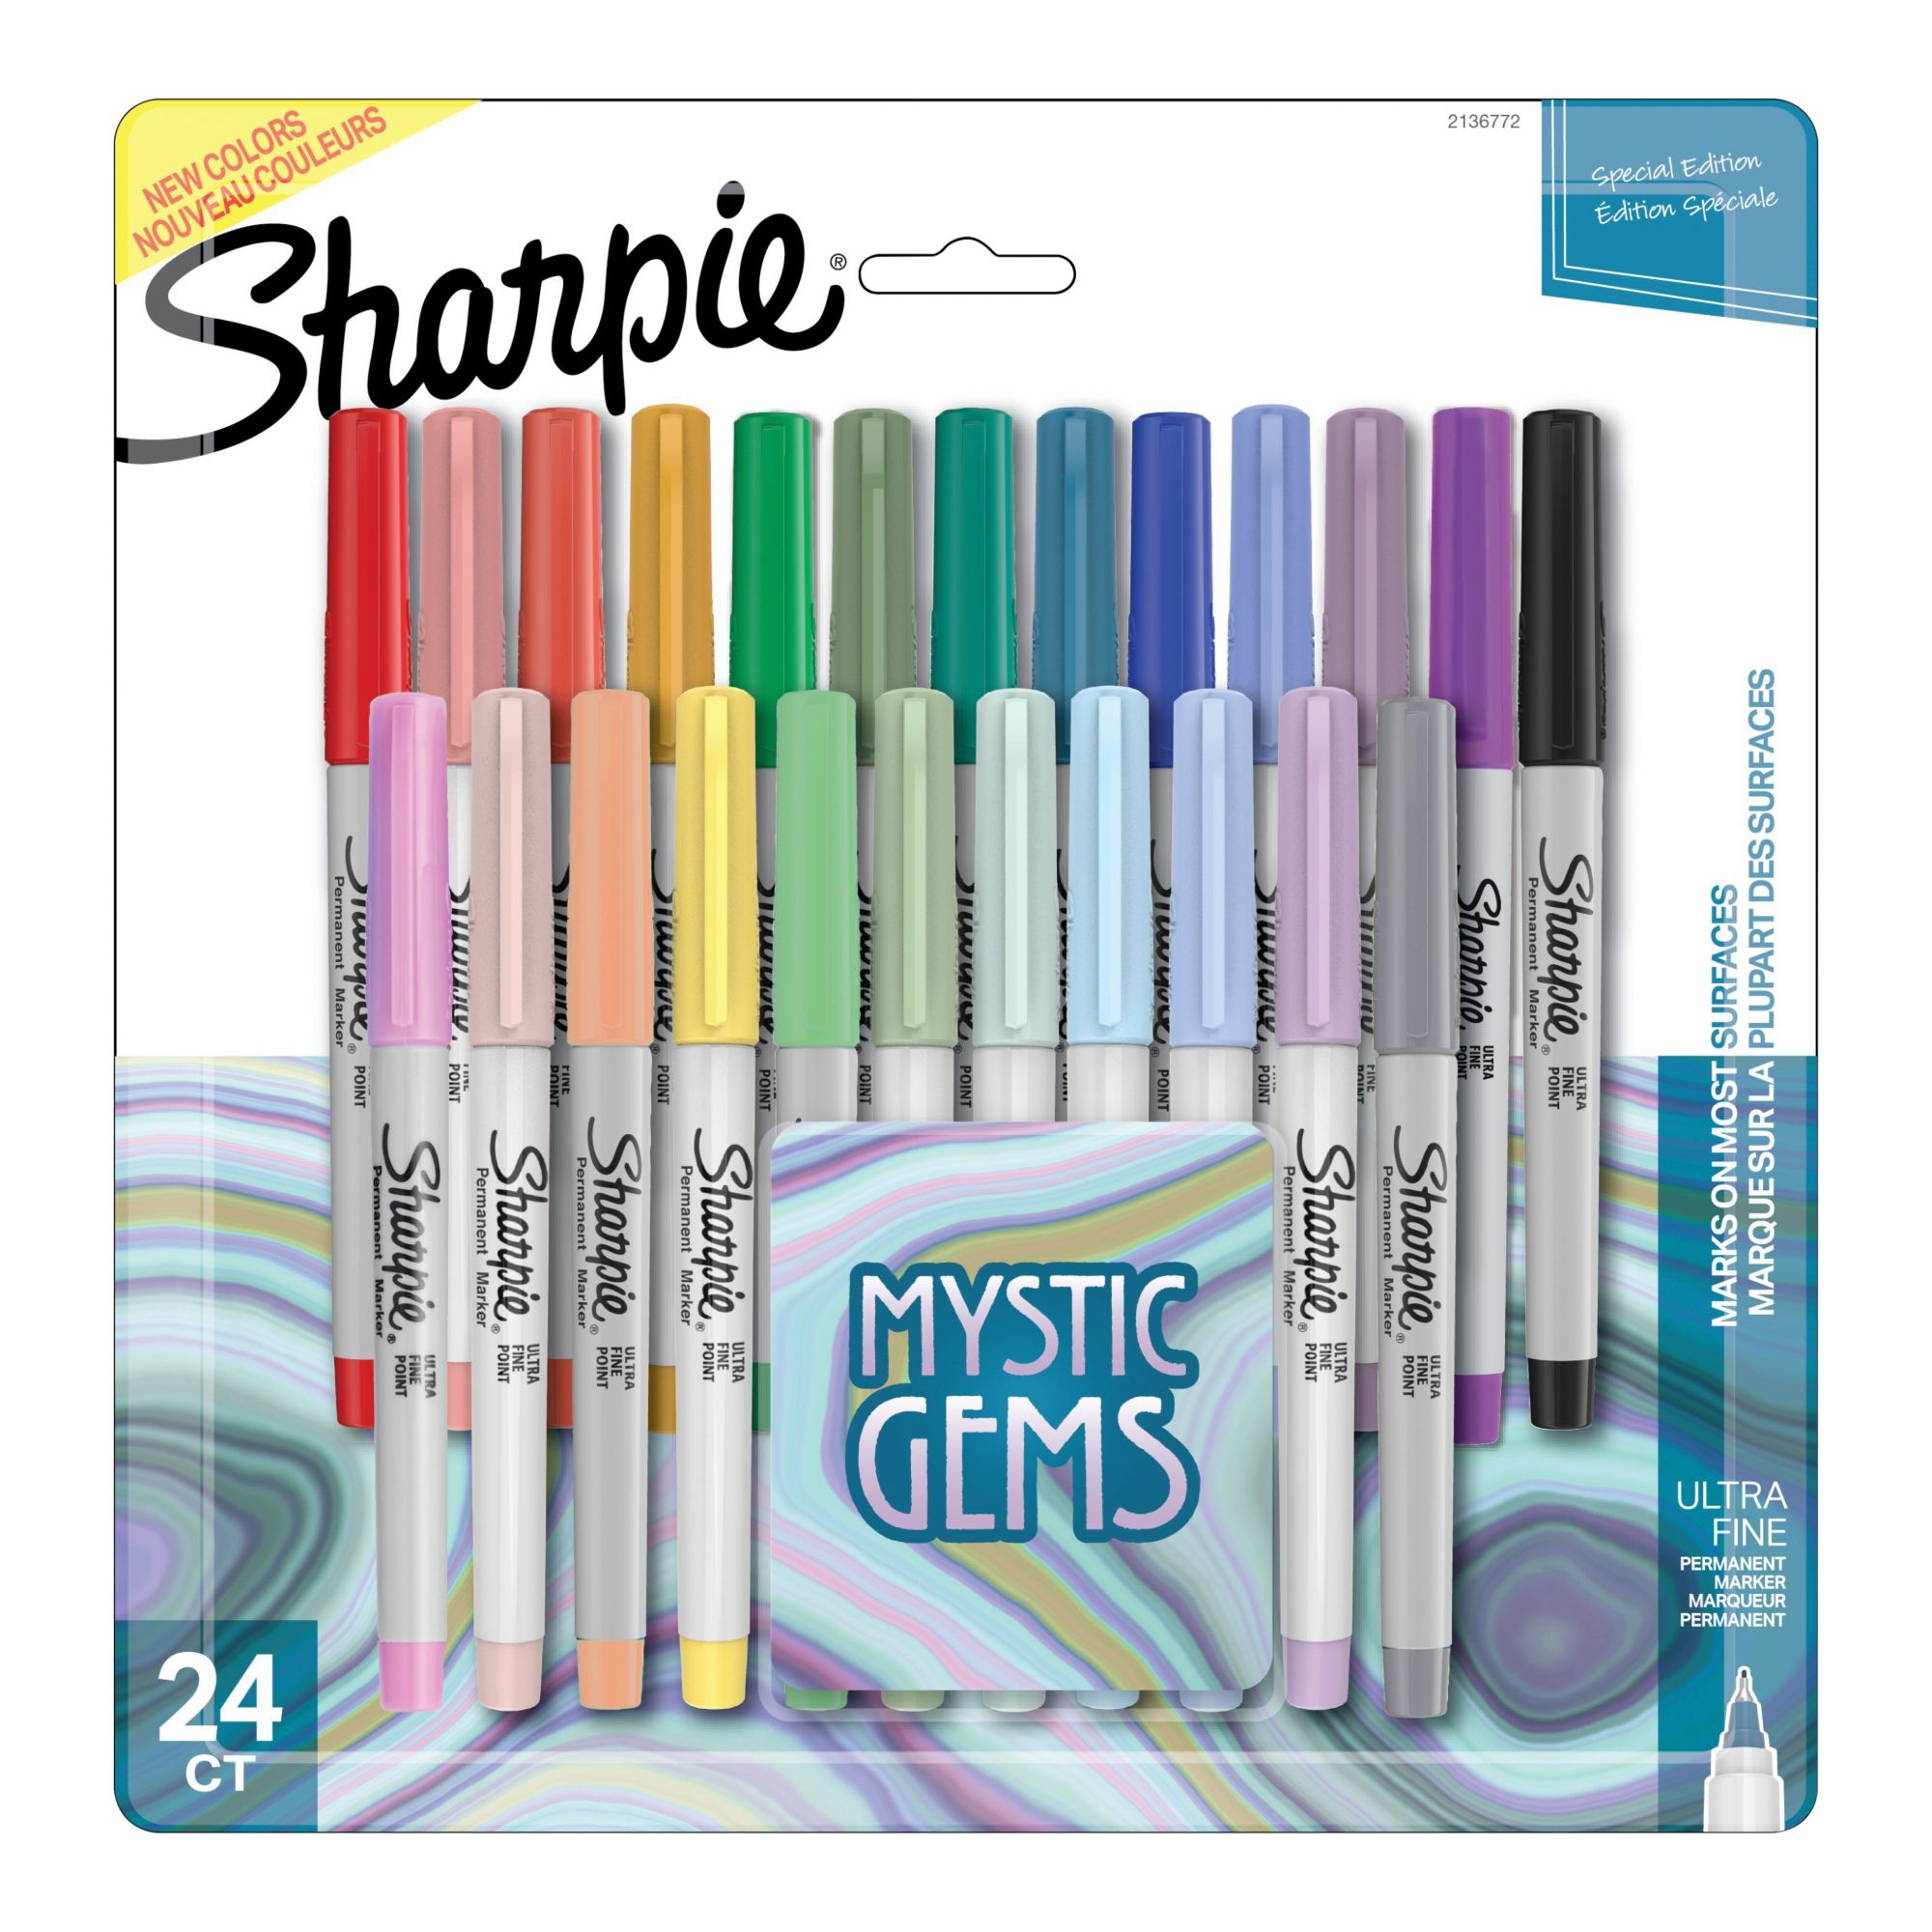 Sharpie Permanent Markers, Fine and Ultra-Fine Tips, Cosmic Colors, 45  Count 